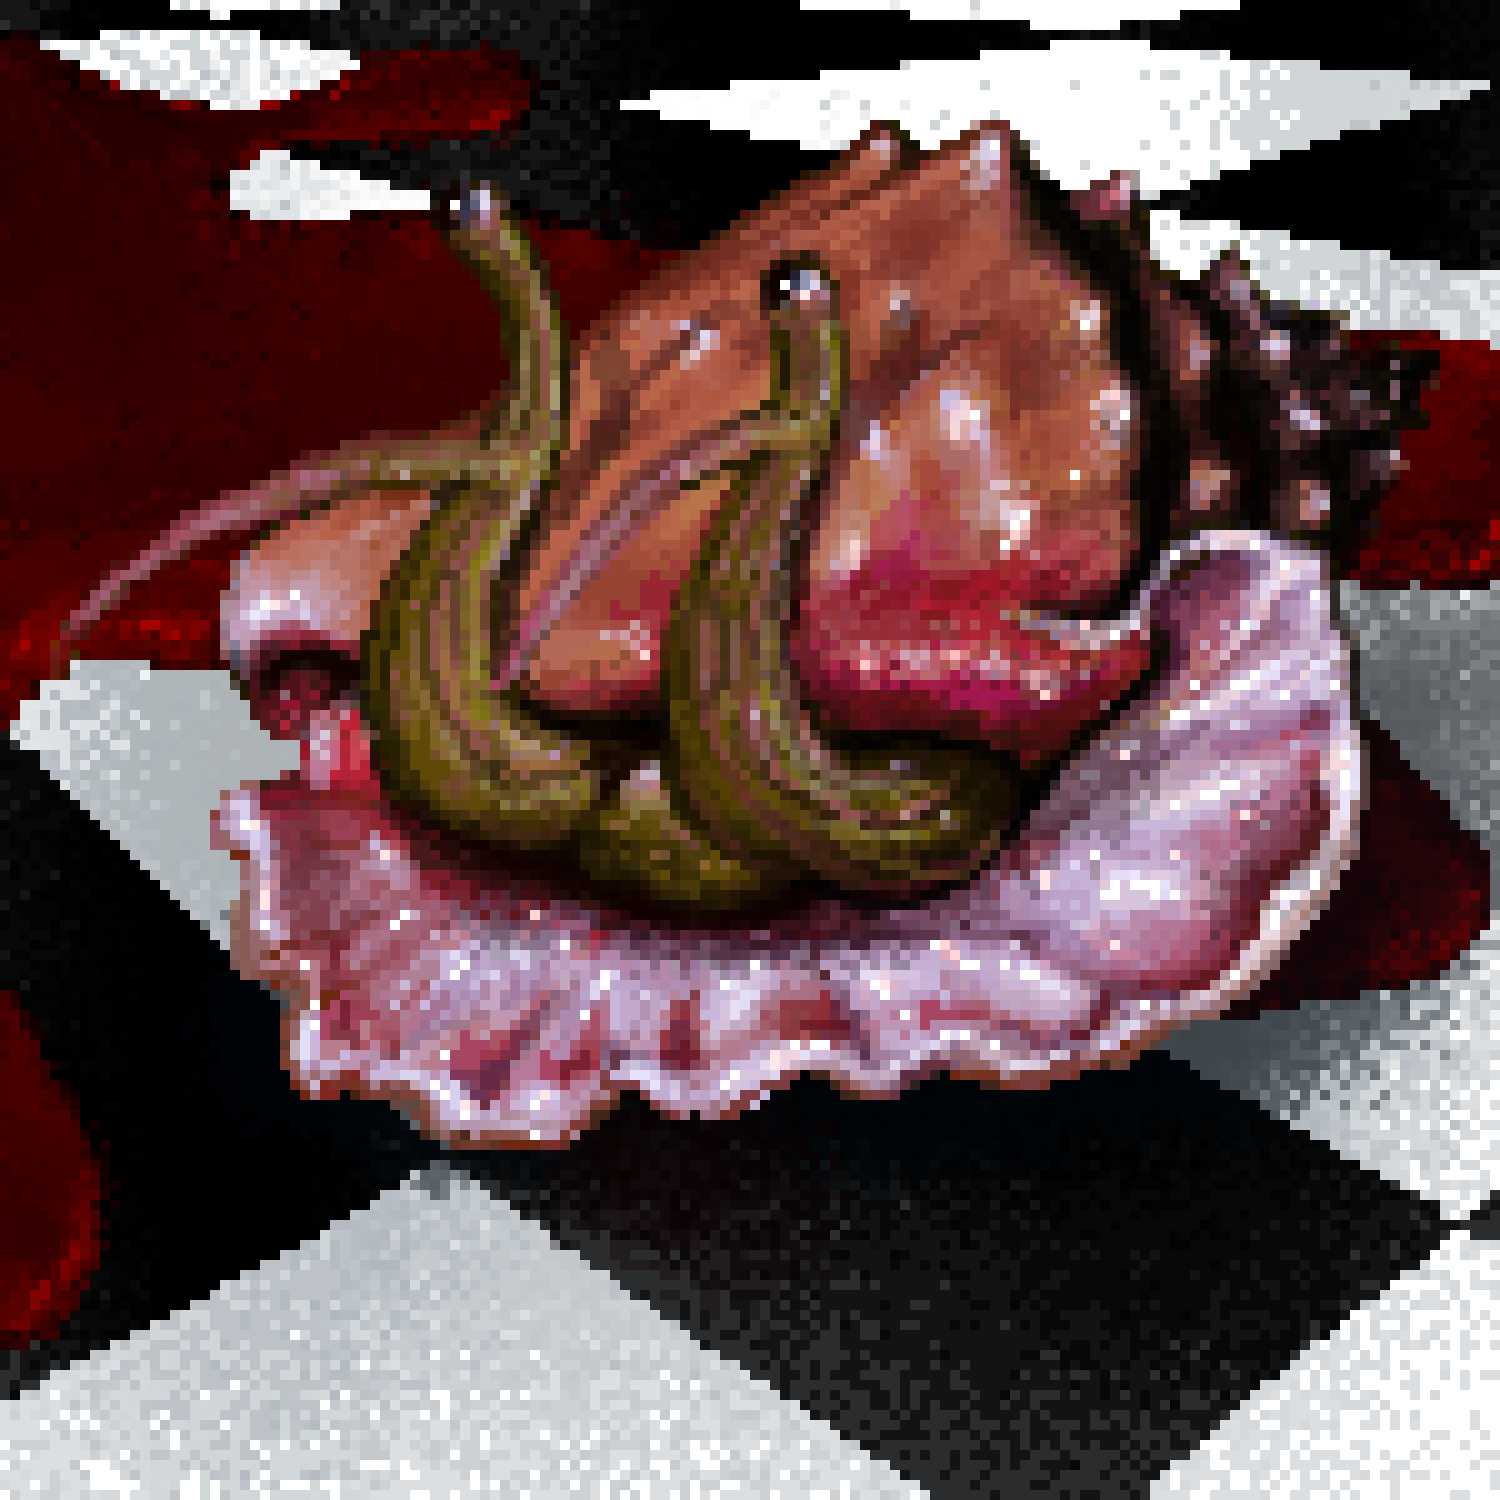 Pixel art drawing of a conch shell sitting on a black and white tile floor with a pool of blood coming into frame next to it while the conch pokes its eye stalks out of the shell.